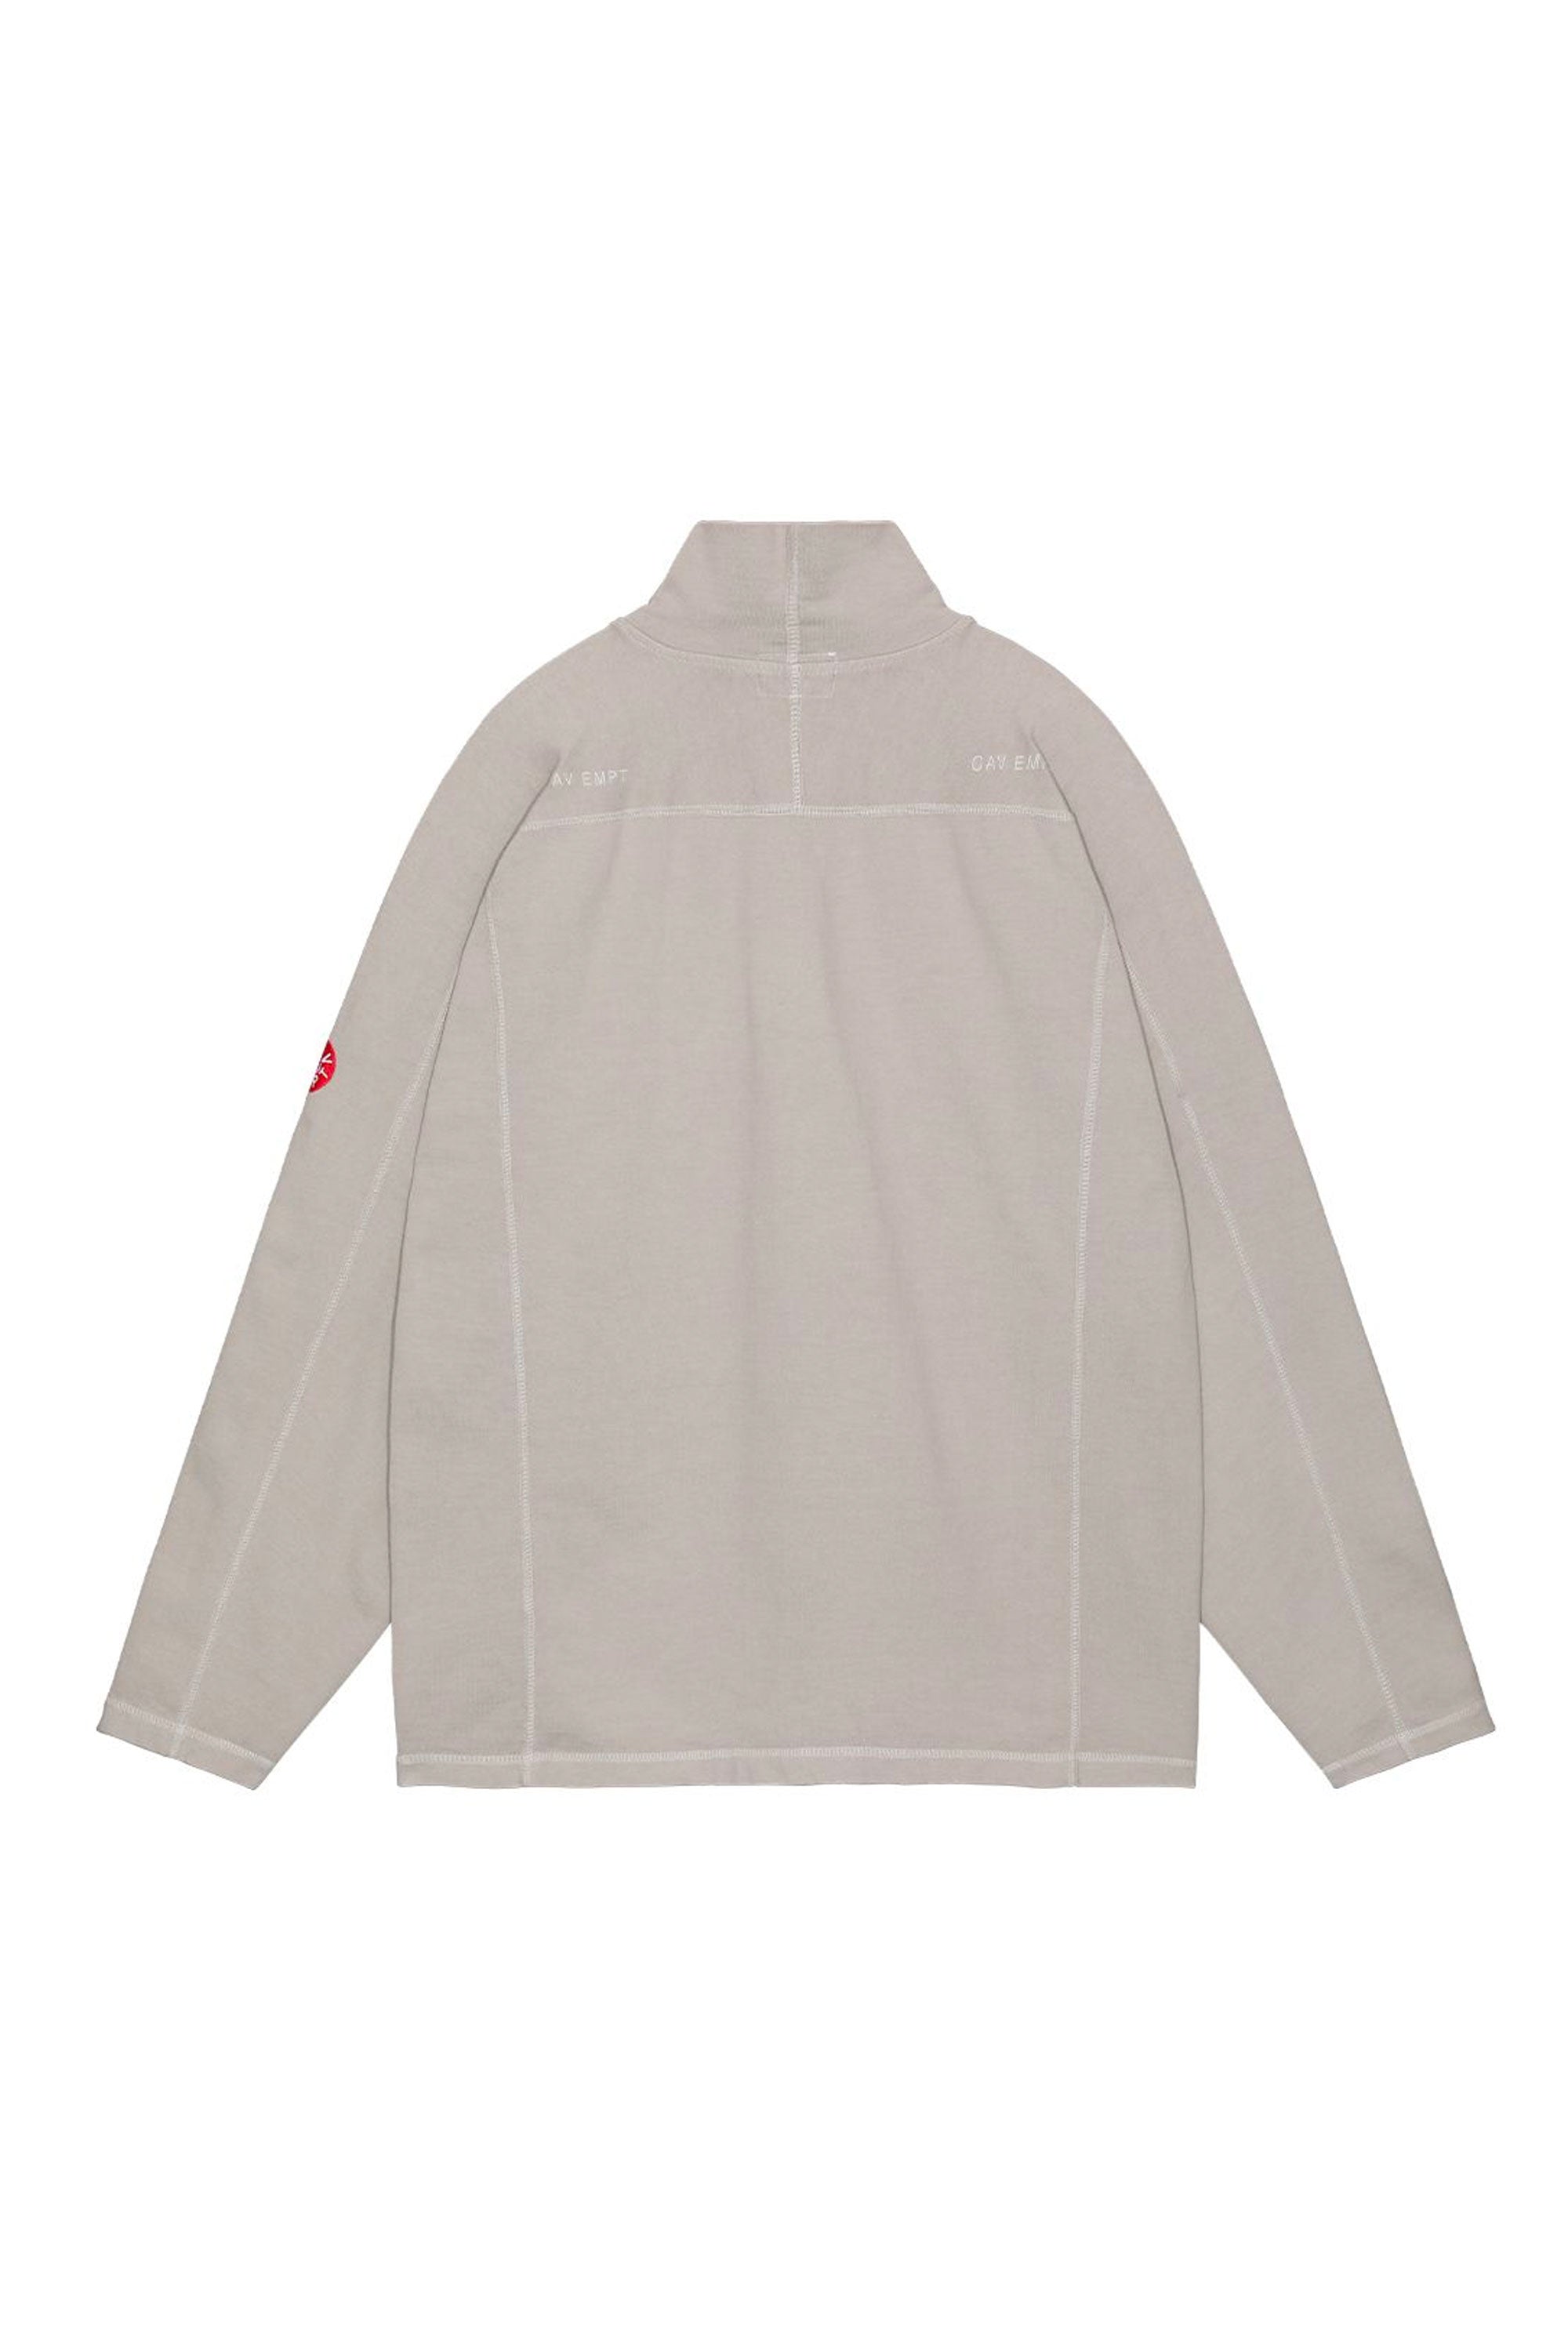 The CAV EMPT - OVERDYE HALF ZIP TURTLE LONG SLEEVE T  available online with global shipping, and in PAM Stores Melbourne and Sydney.